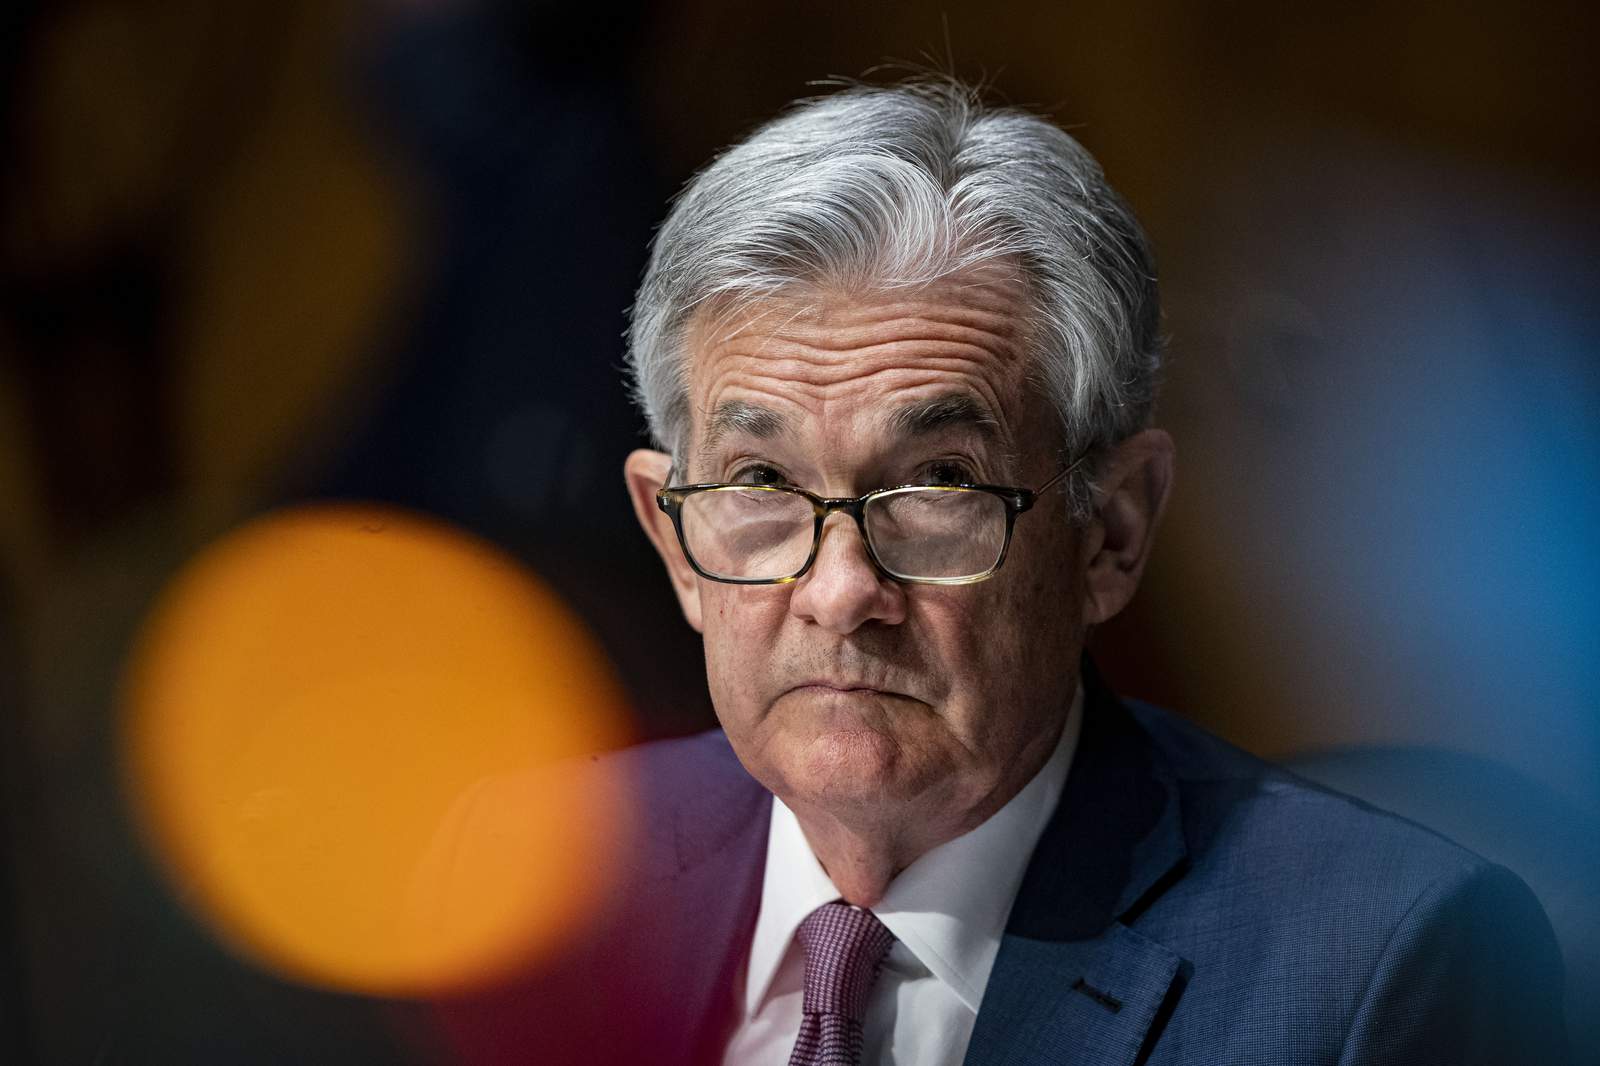 Powell defends Fed's consideration of climate change risks